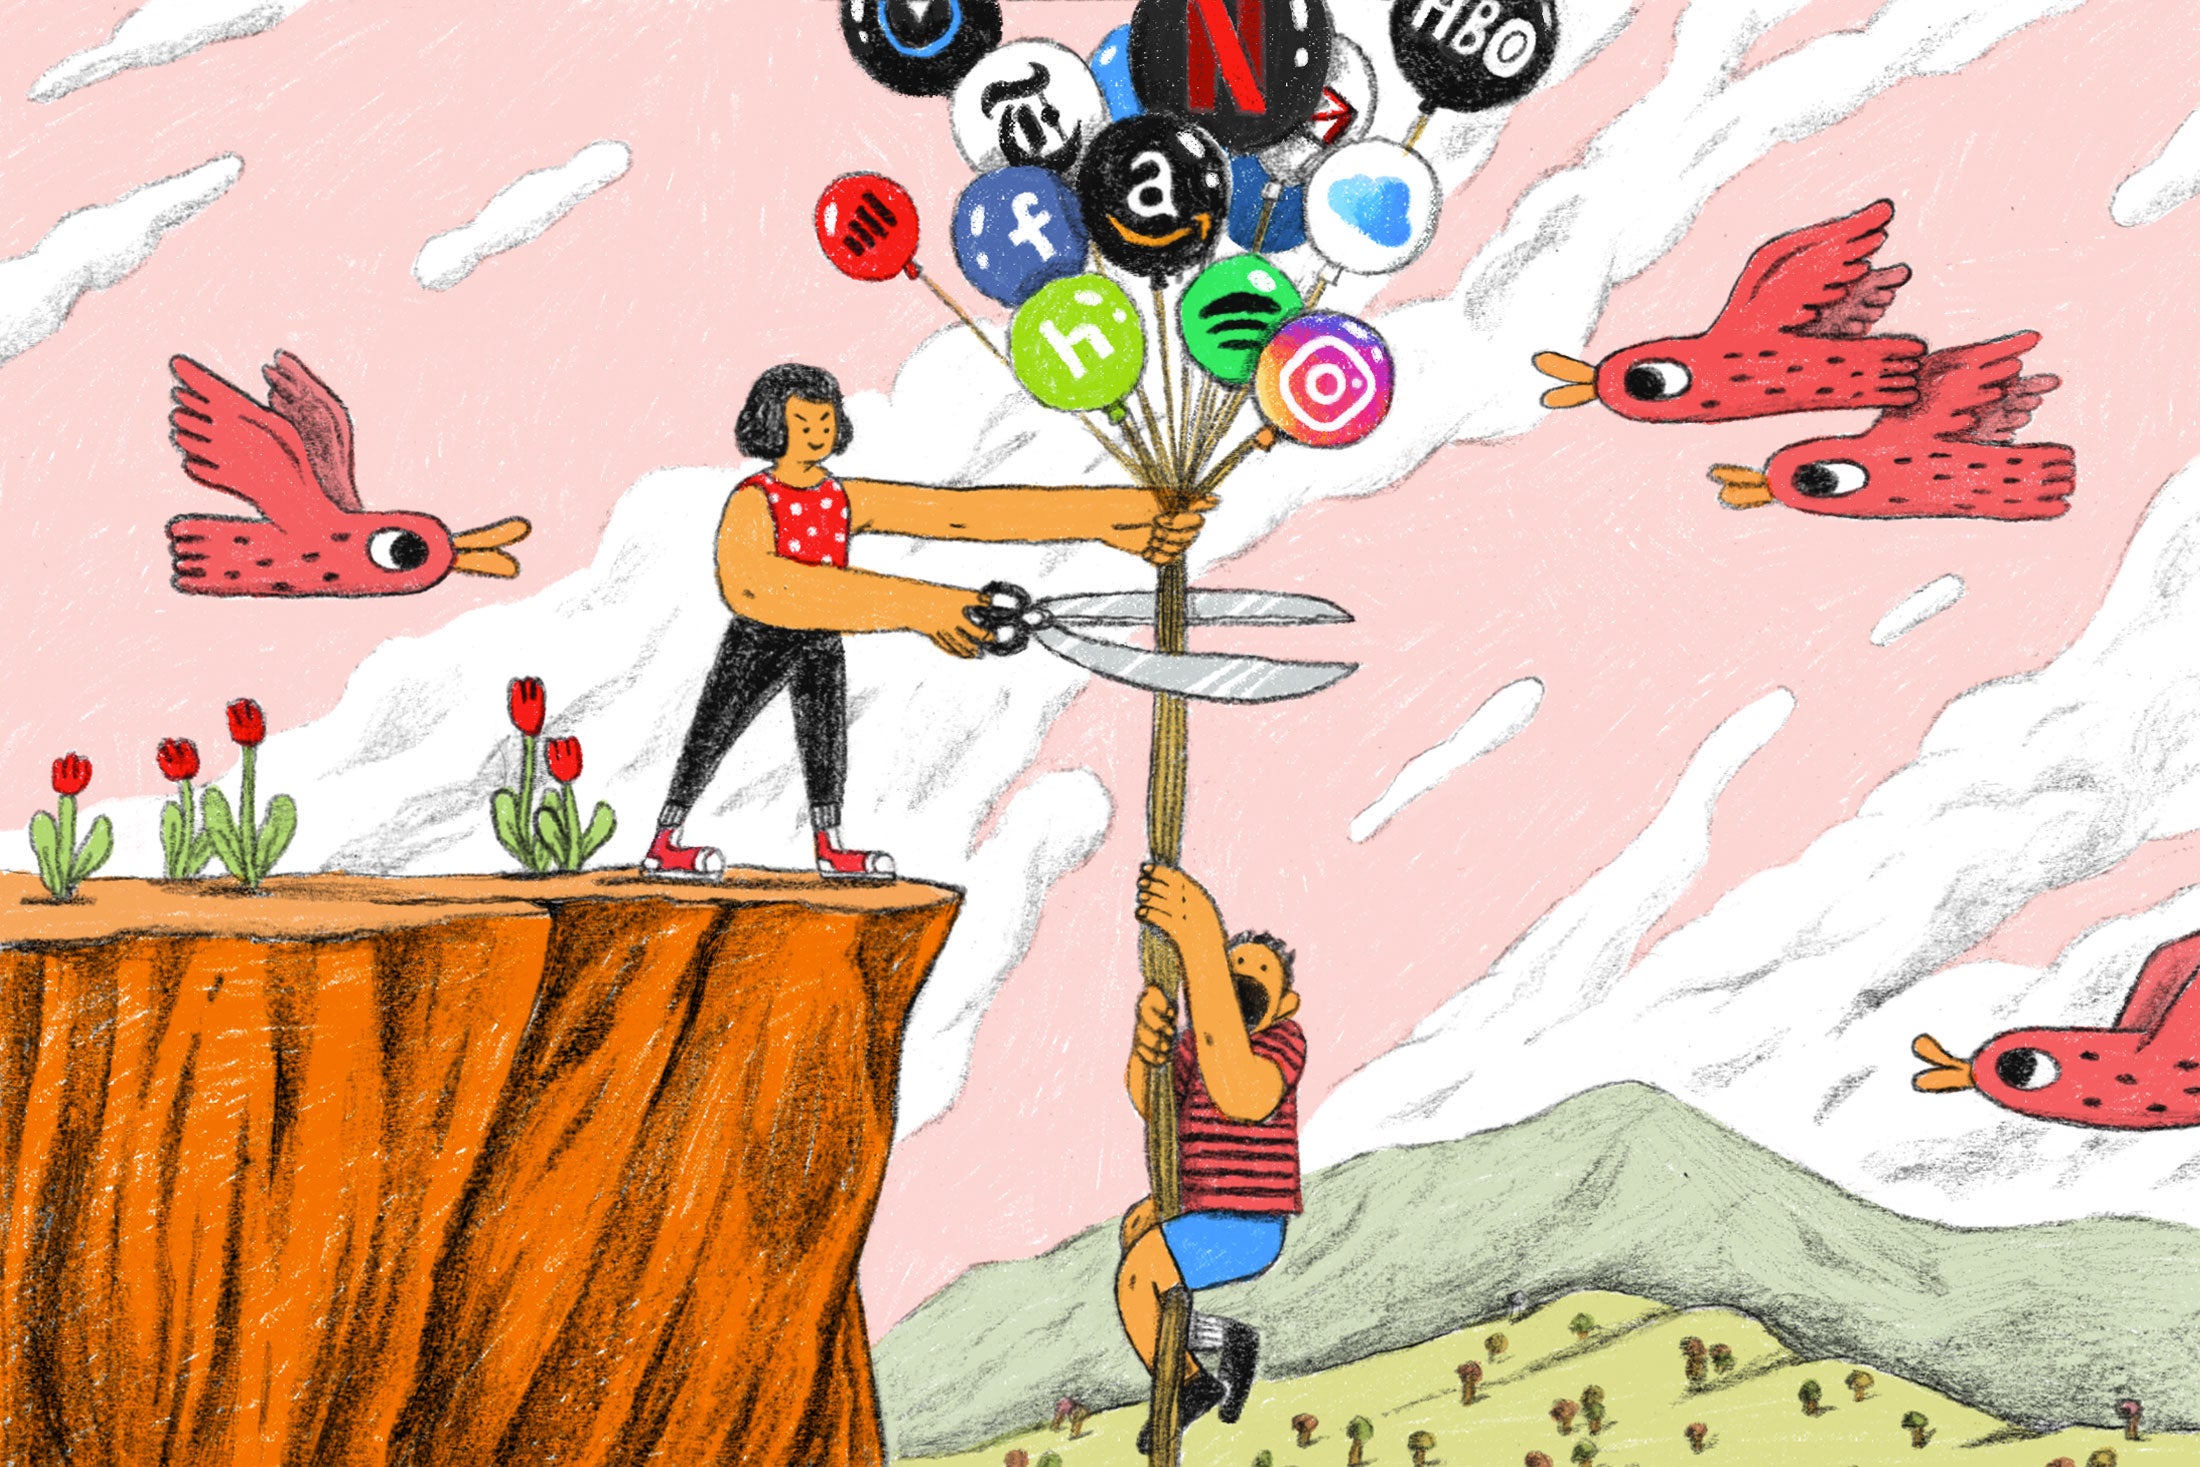 Illustration: A woman wields giant scissors about to cut a set of balloons featuring various service logos. A man is clutching the balloons by their strings below where the woman is going to cut them.